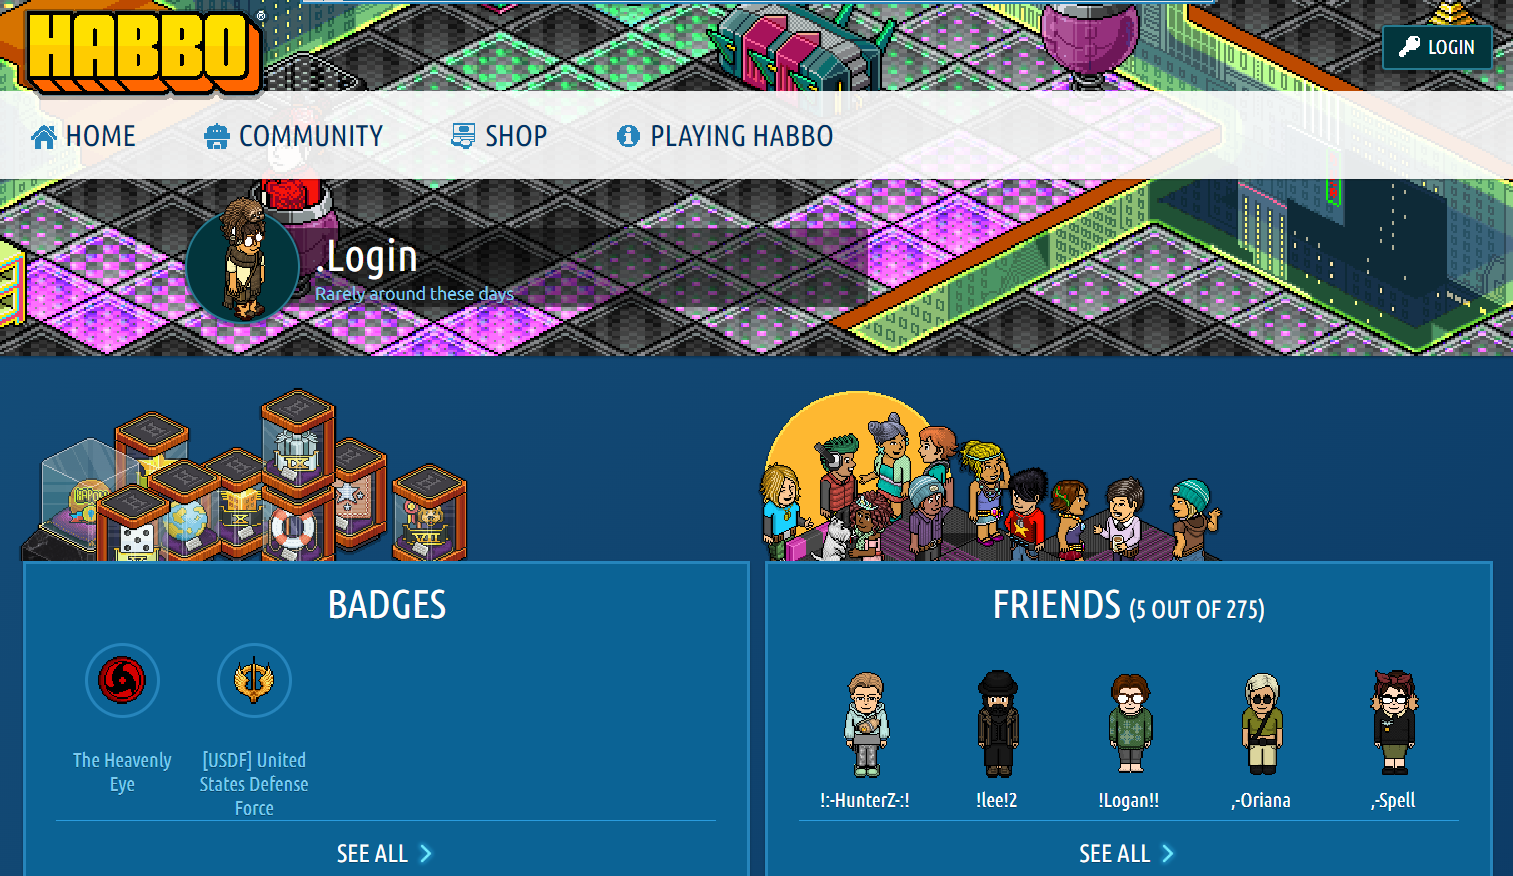 How To Login To Habbo Via Facebook